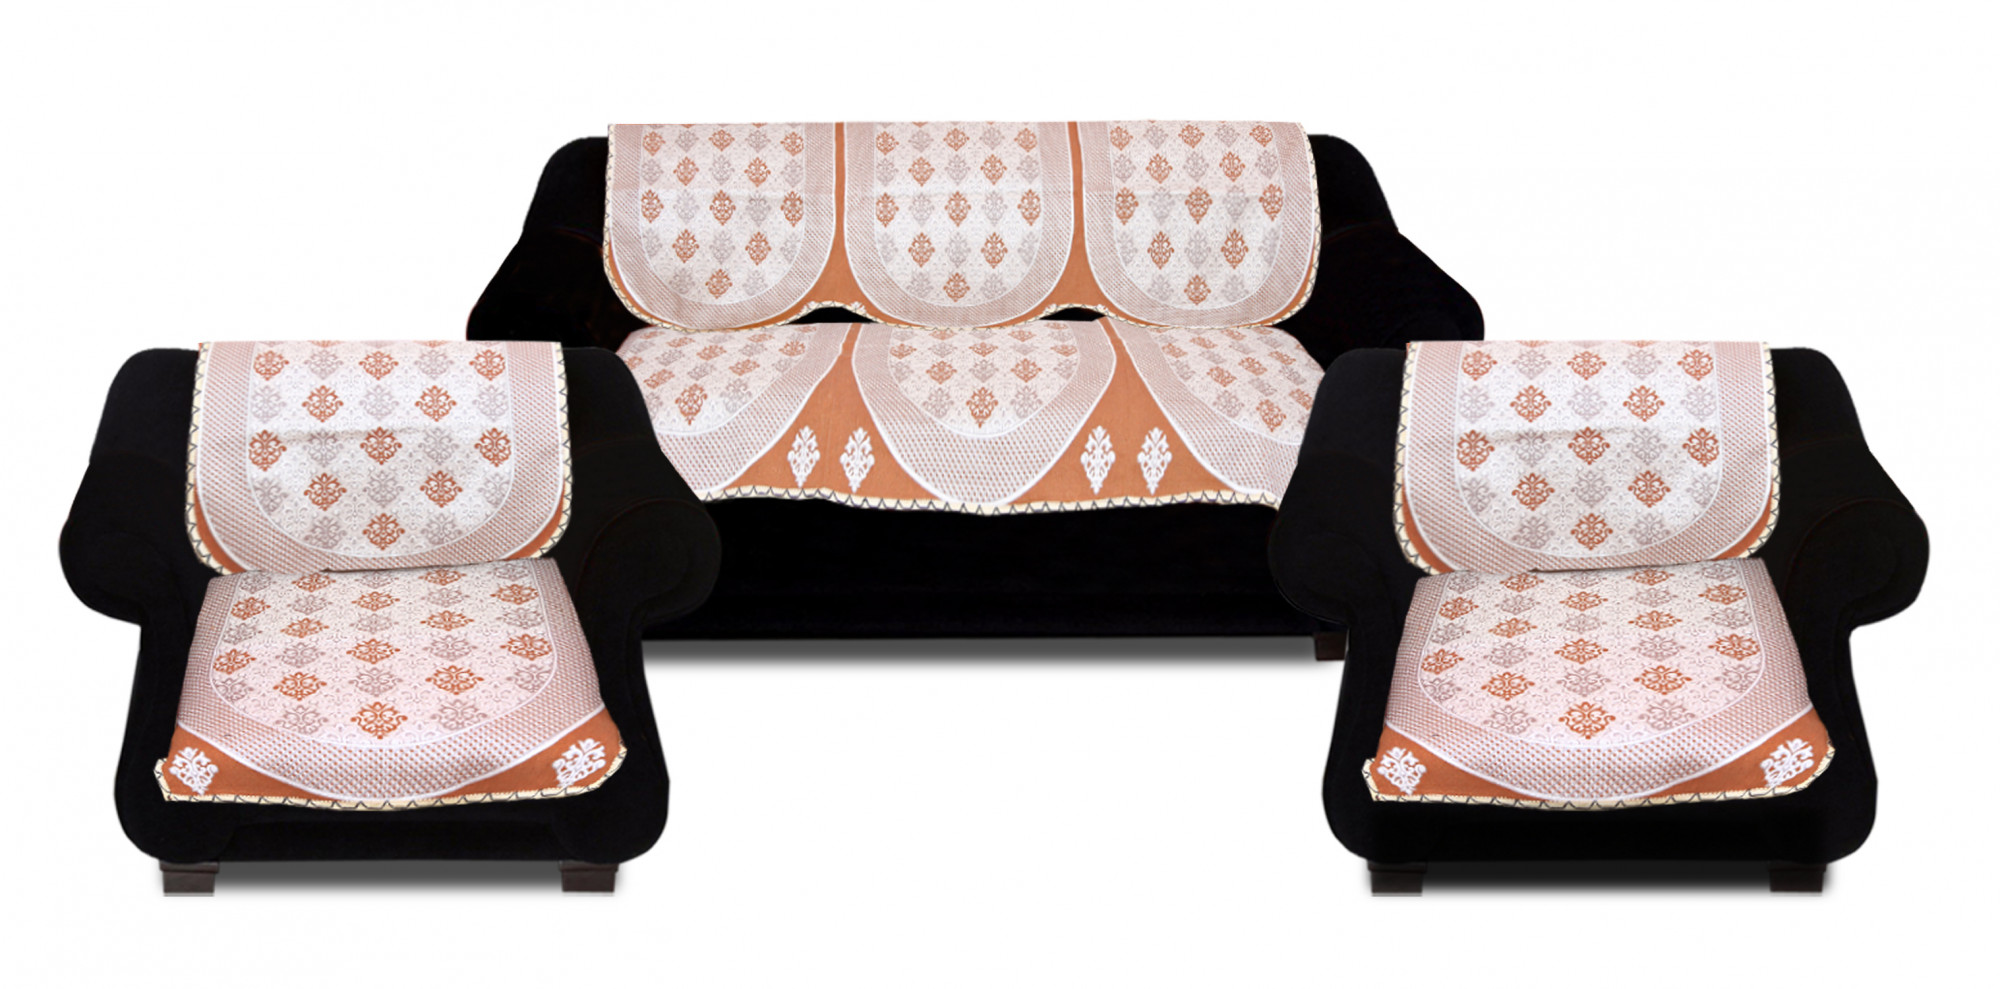 Kuber Industries Luxurious Cotton Floral Design 5 Seater Sofa Cover Set for Living Room (Orange)